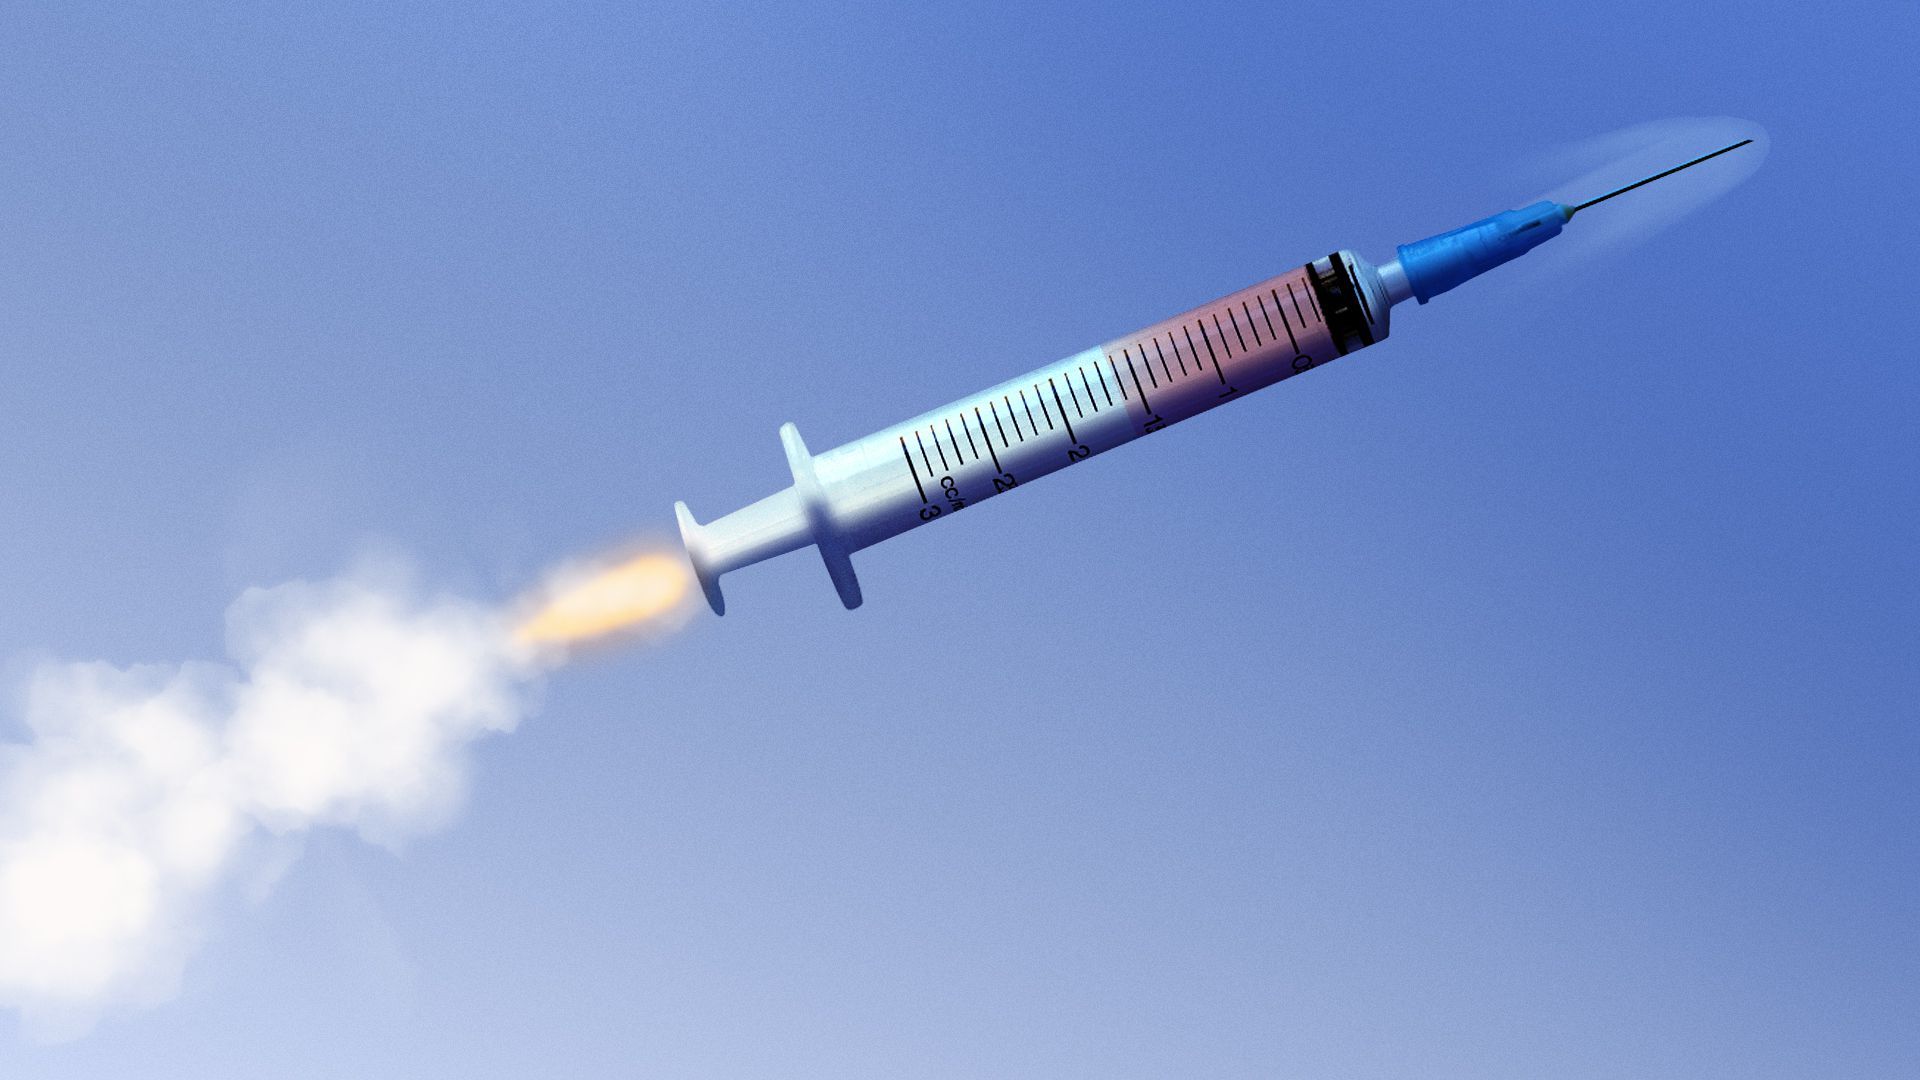 Illustration of a syringe as a rocket propelling through the atmosphere